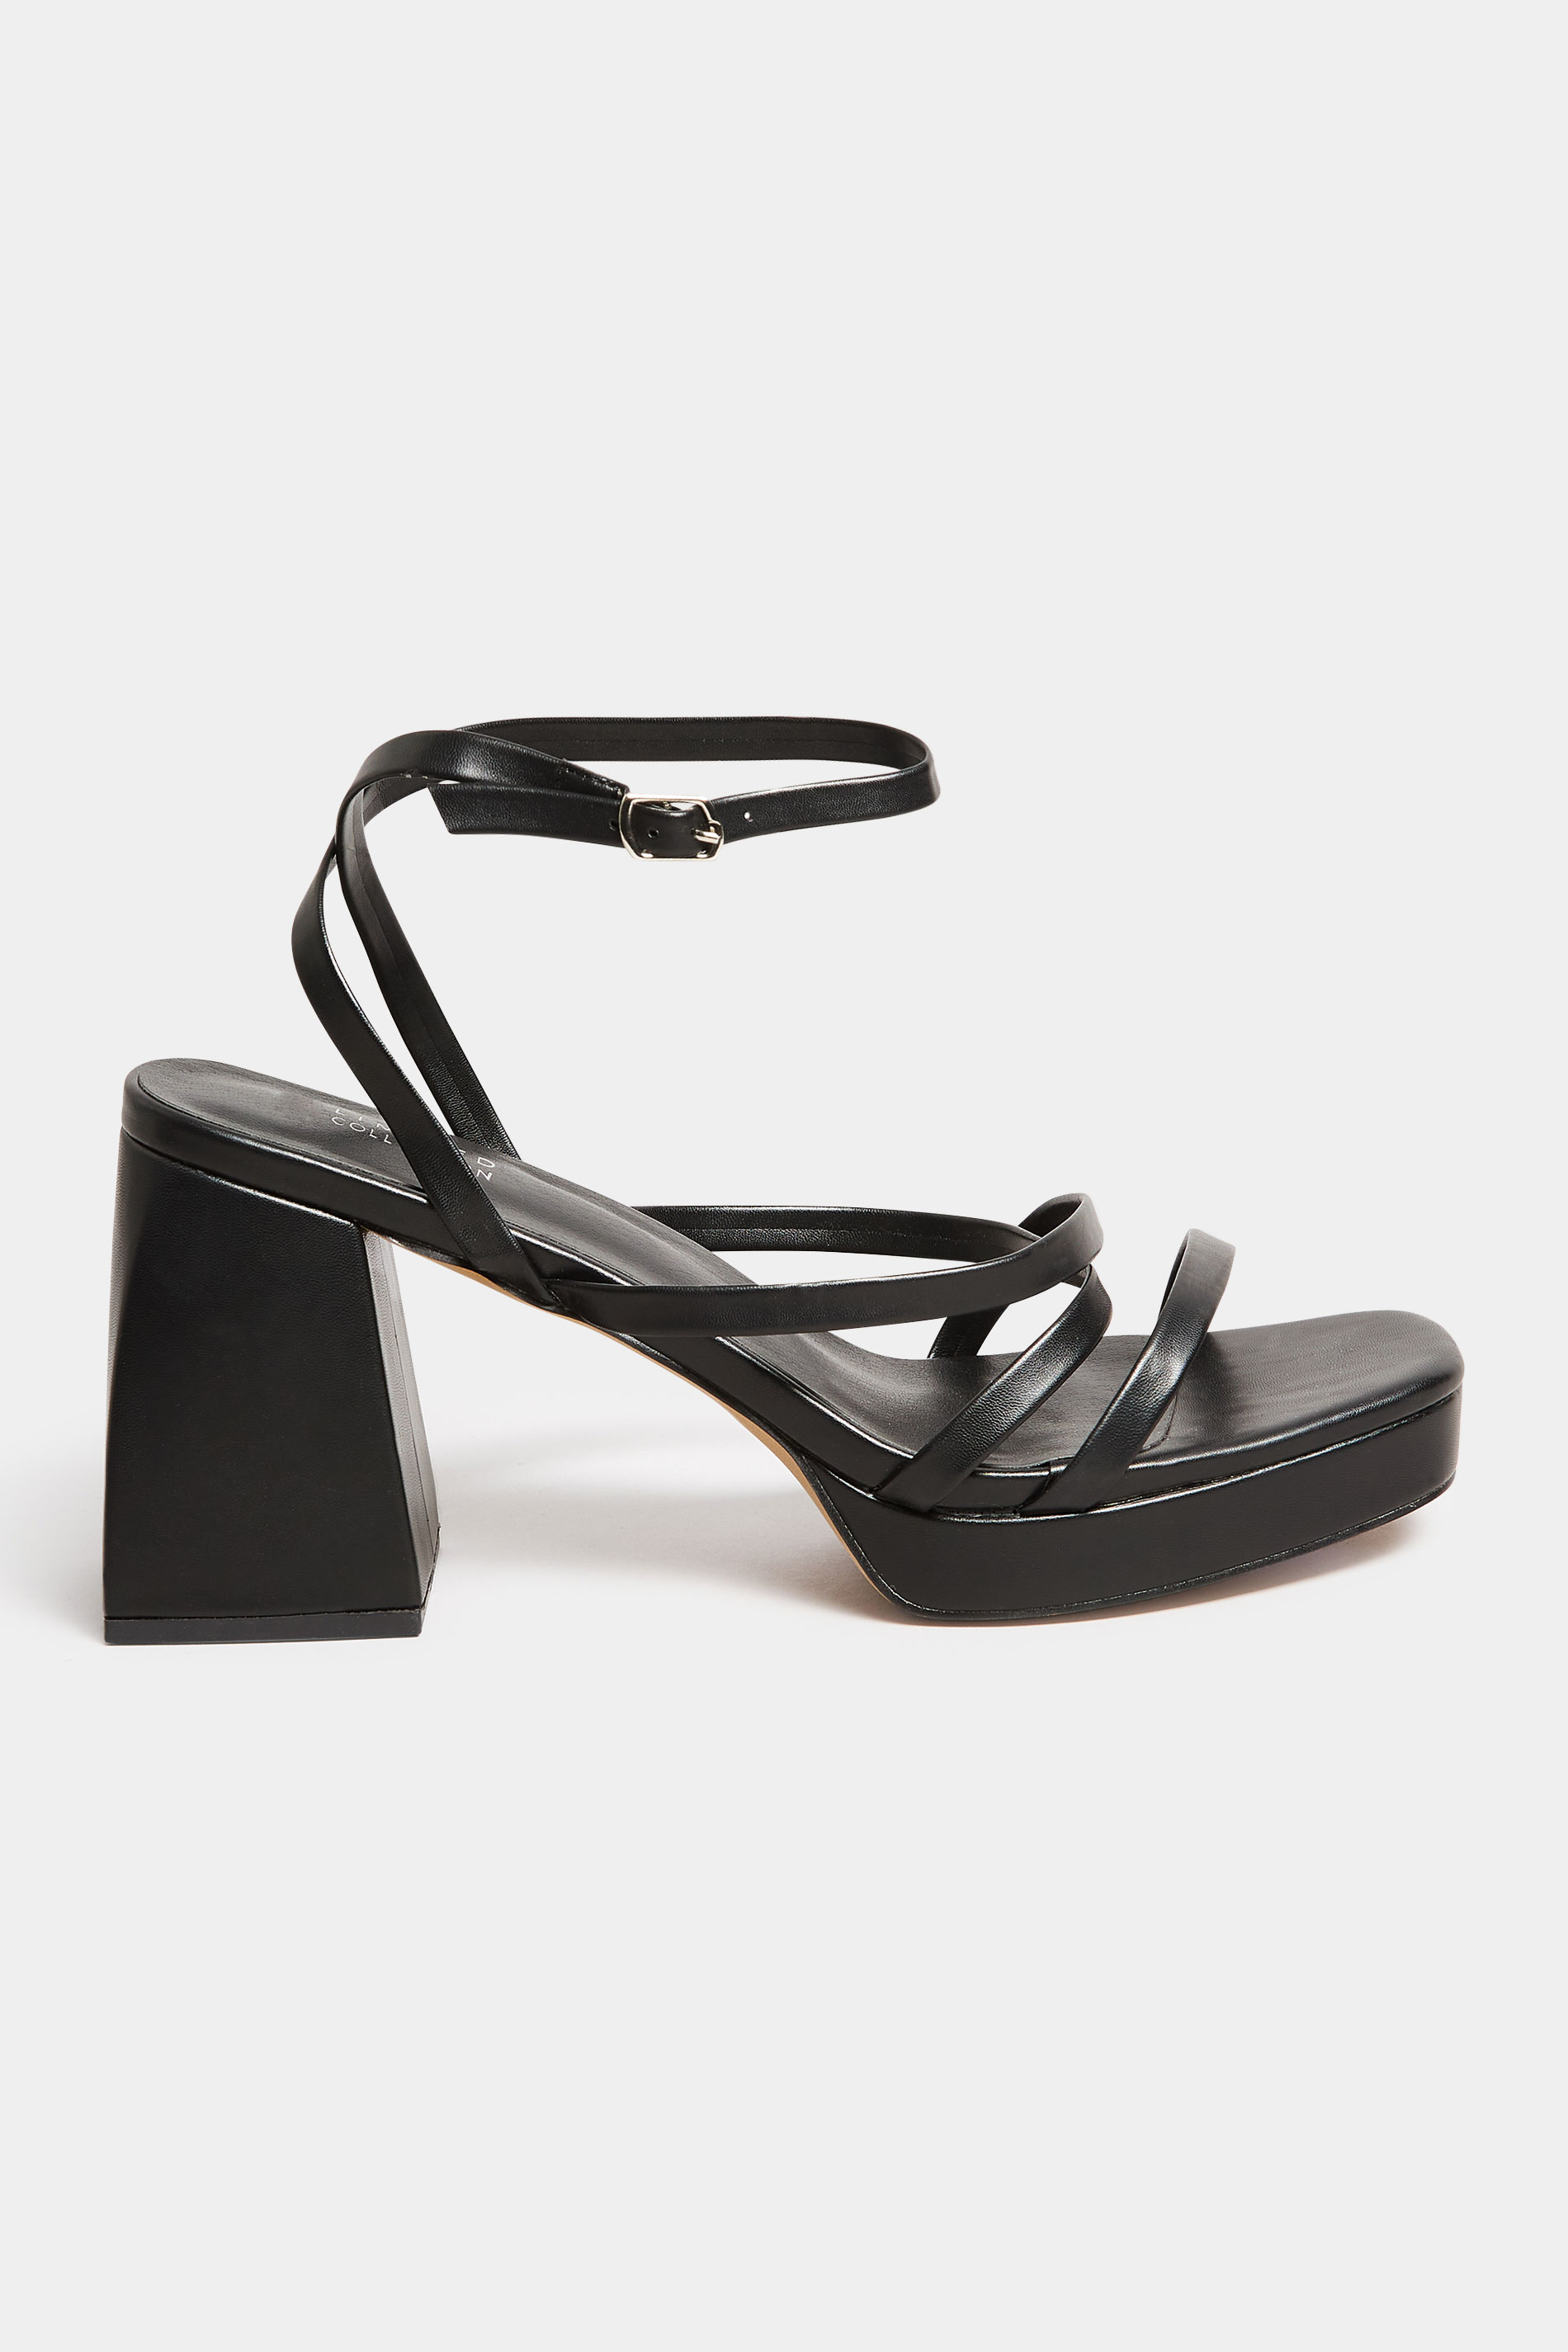 LIMITED COLLECTION Black Strappy Faux Leather Platform Block Heel ...